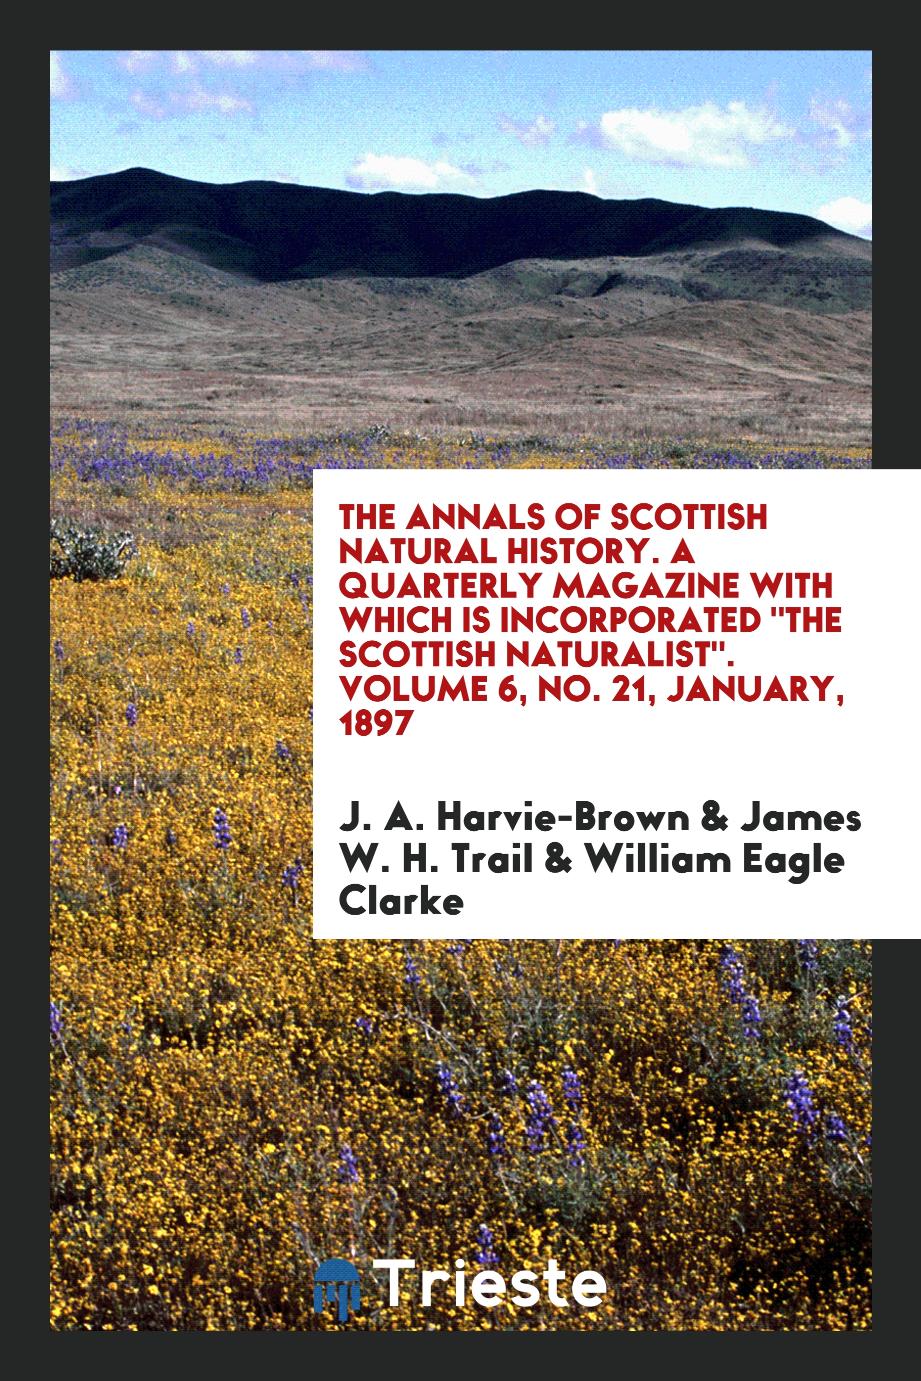 The Annals of Scottish Natural History. A Quarterly Magazine with Which Is Incorporated "The Scottish Naturalist". Volume 6, No. 21, January, 1897